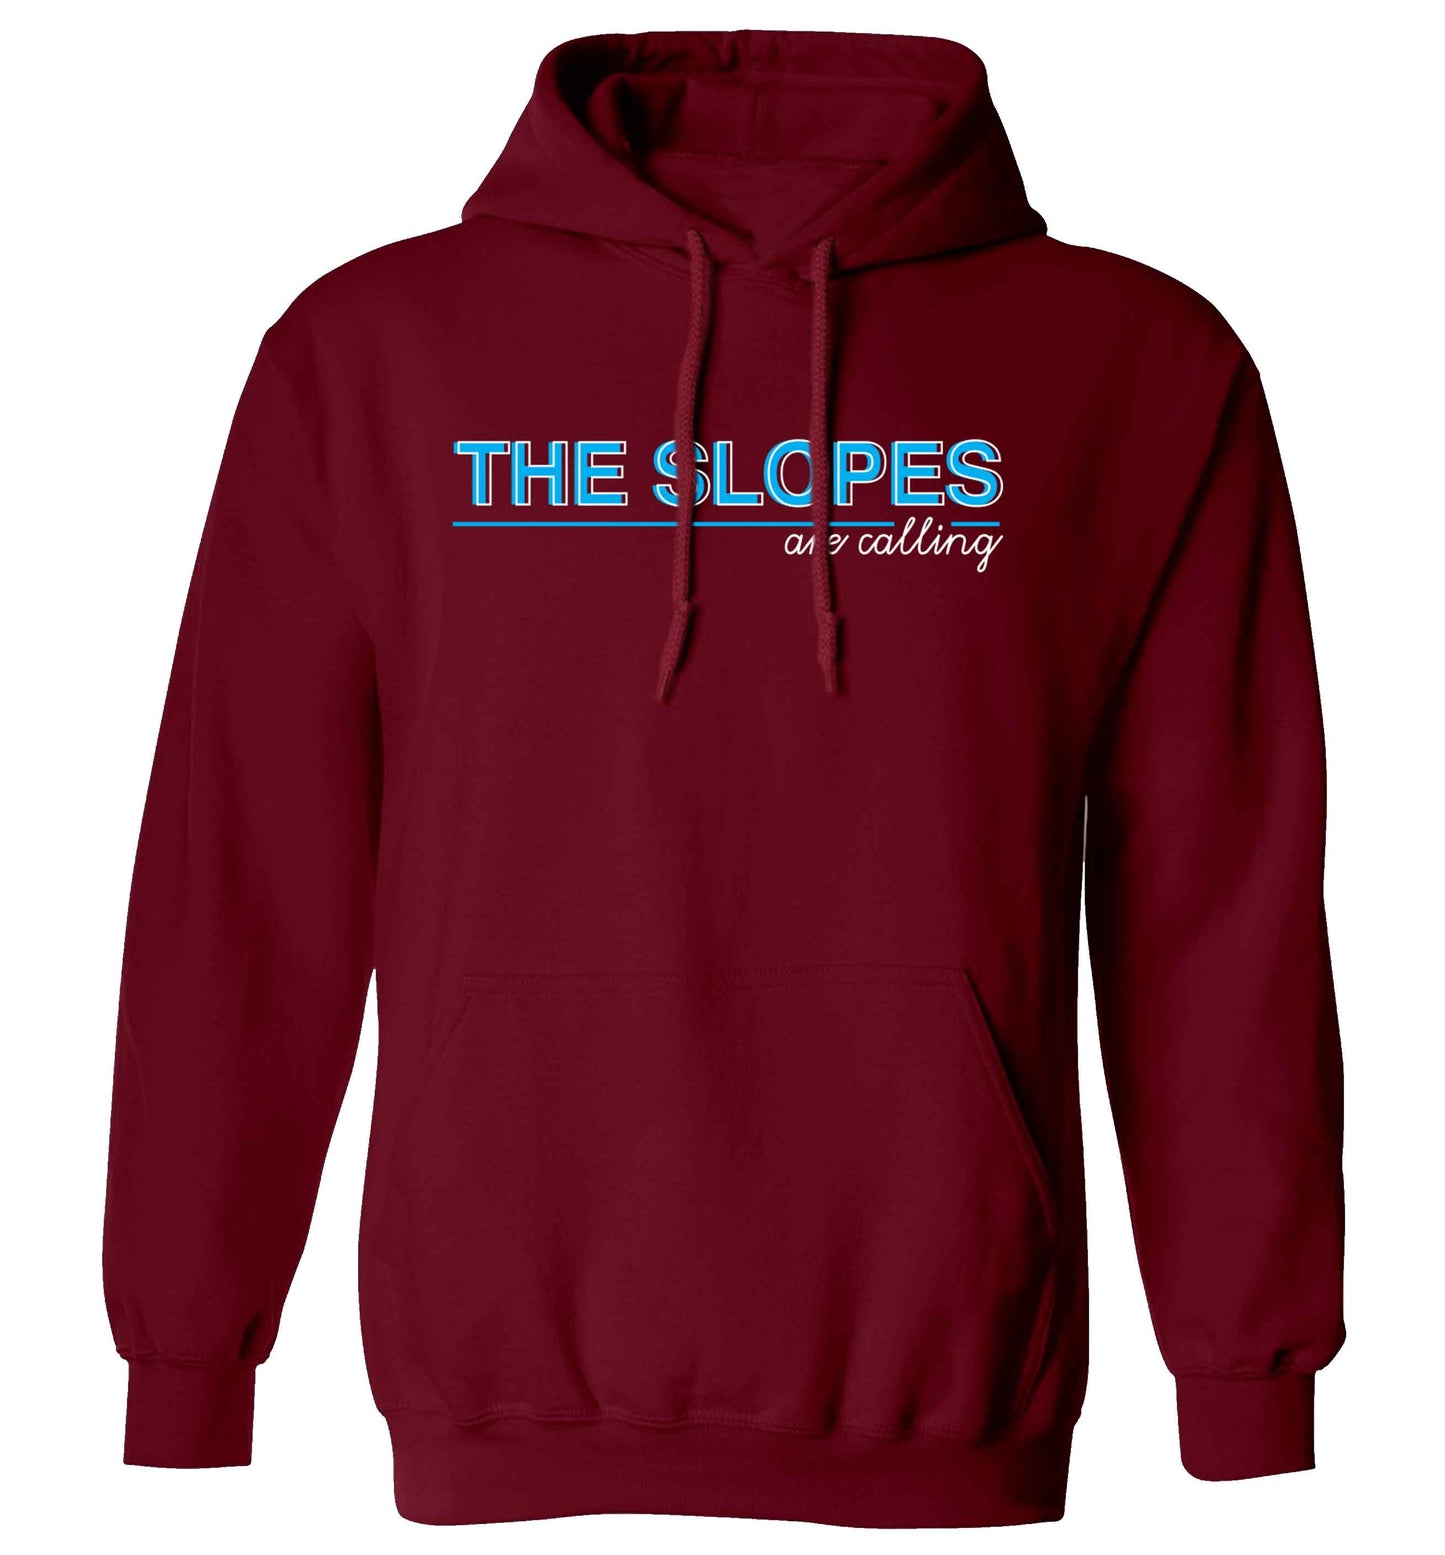 The slopes are calling adults unisex maroon hoodie 2XL